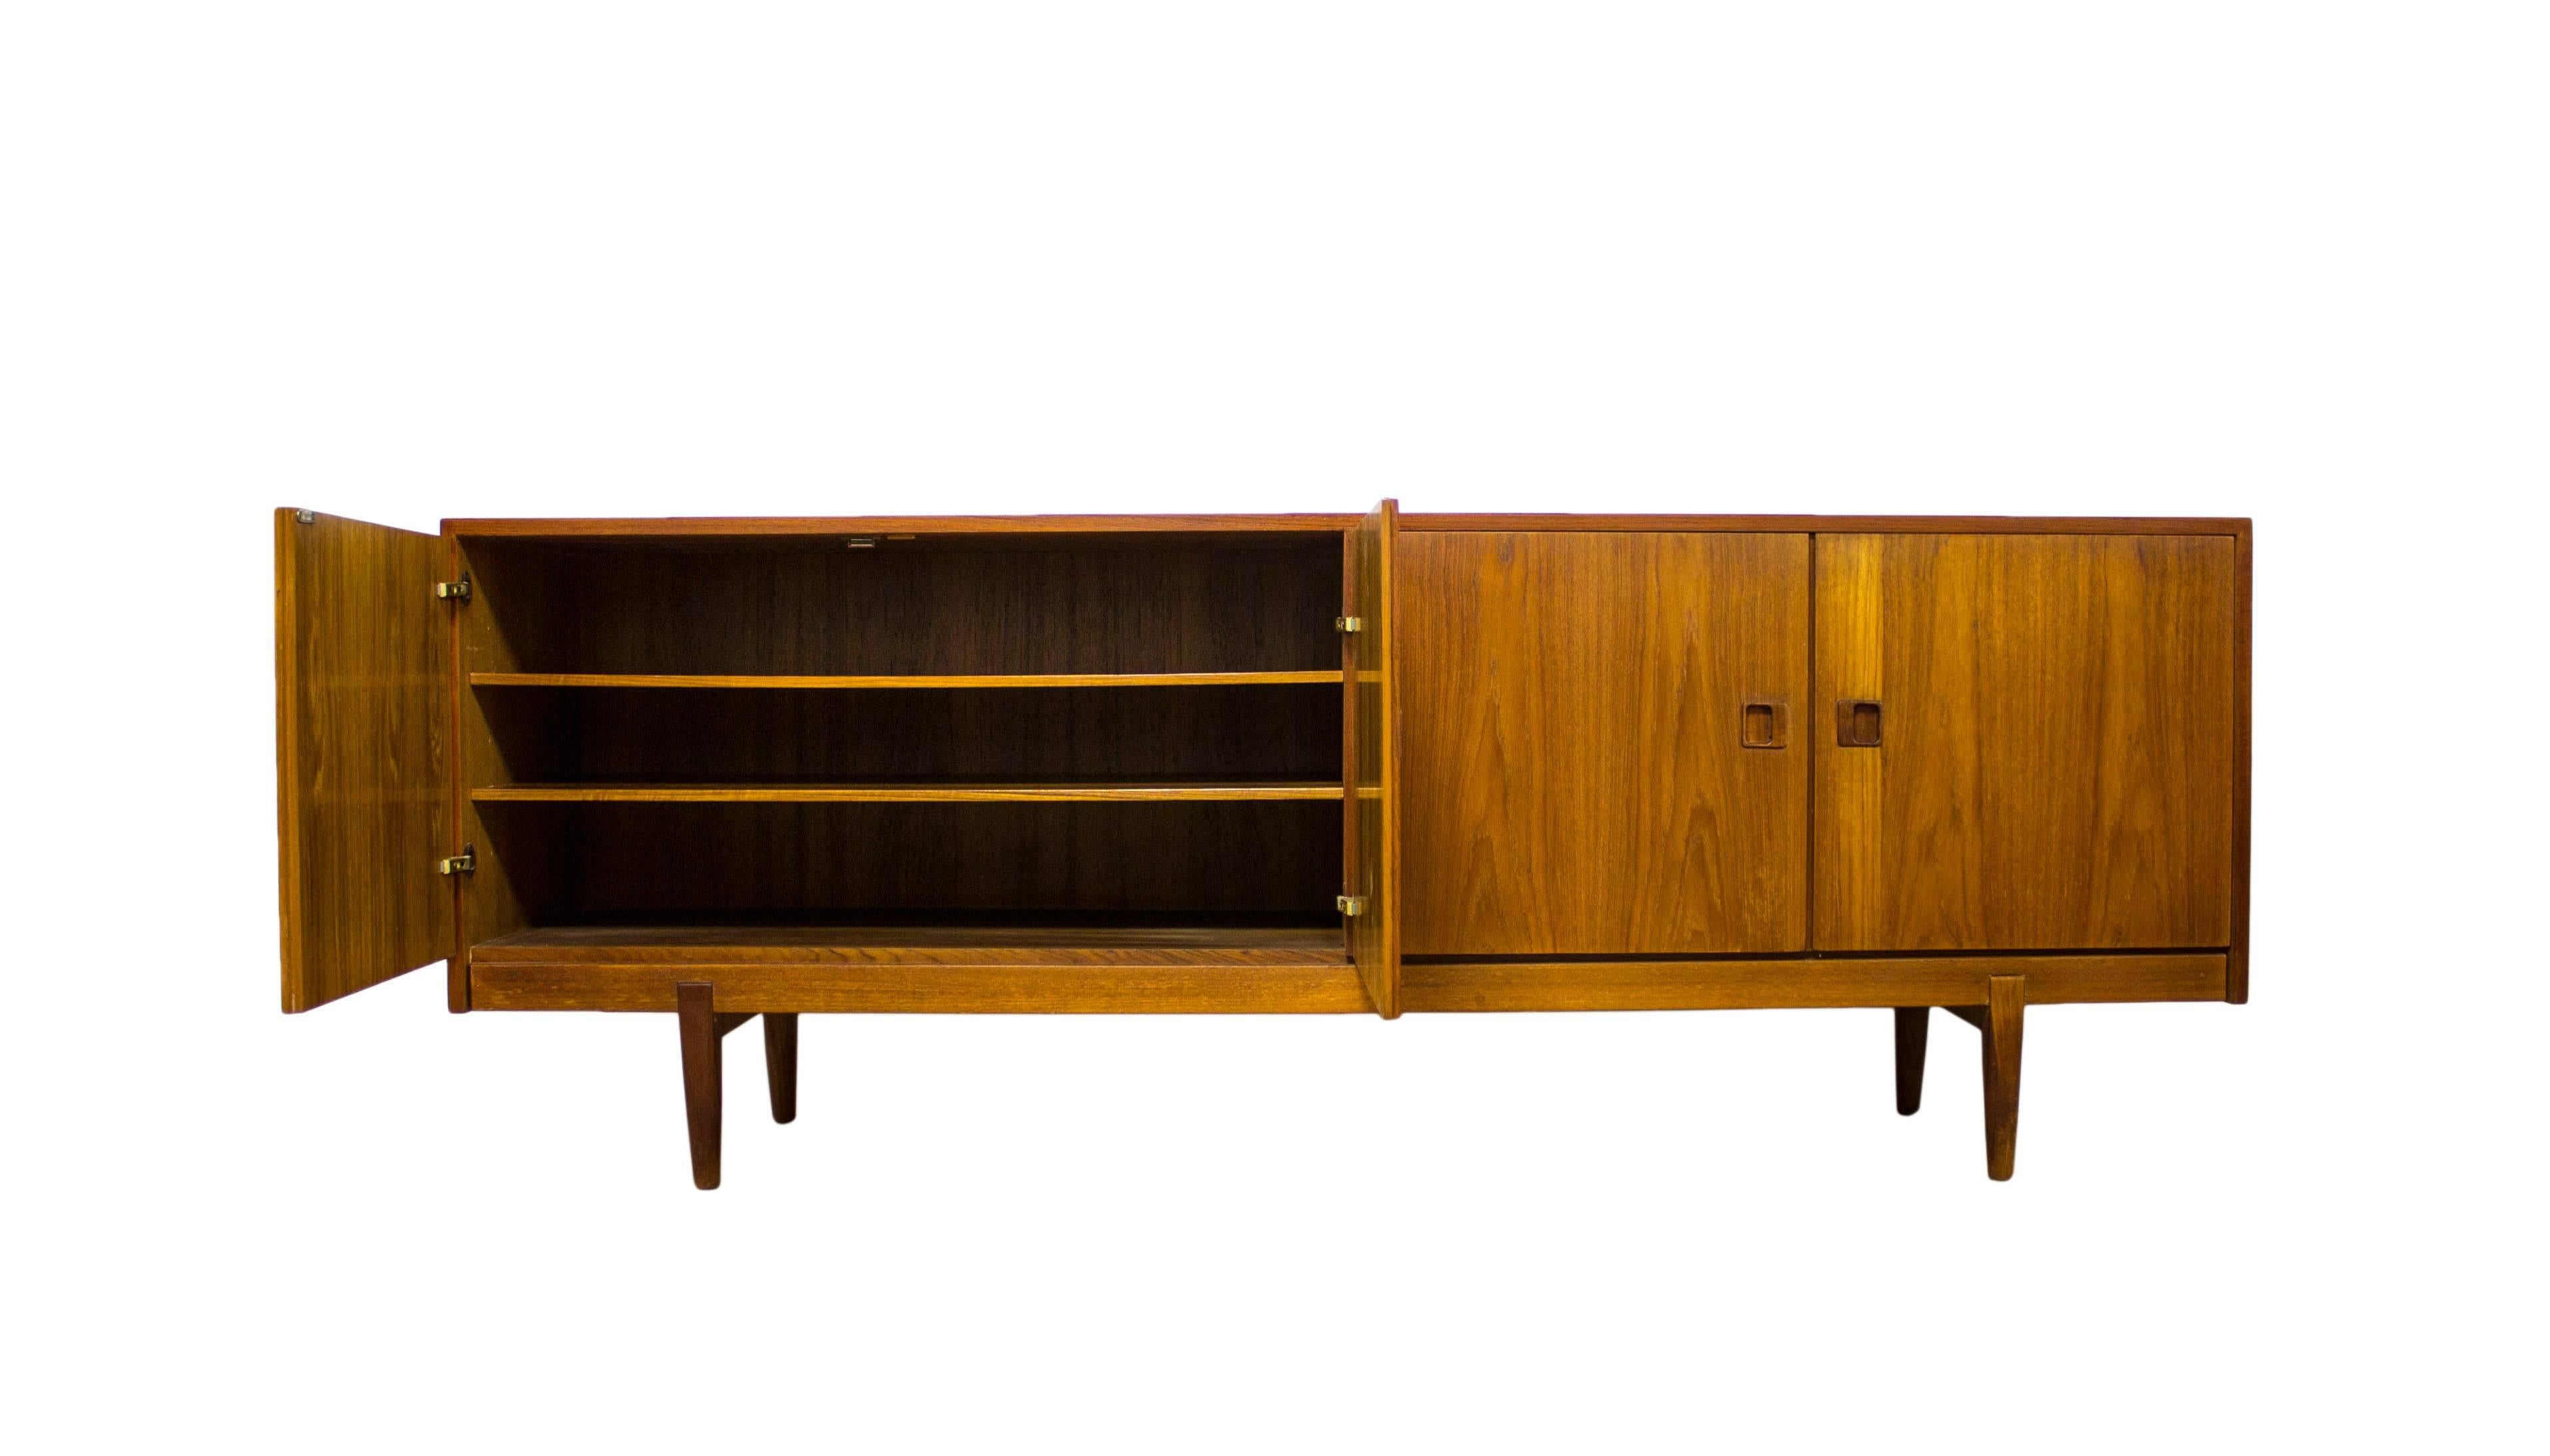 When it comes to innovative design, the Mid-Century era was dominated by the highly talented Danish designers whose skills and eye for detail produced some of the finest furniture which is still in high demand to this day.

This beautiful